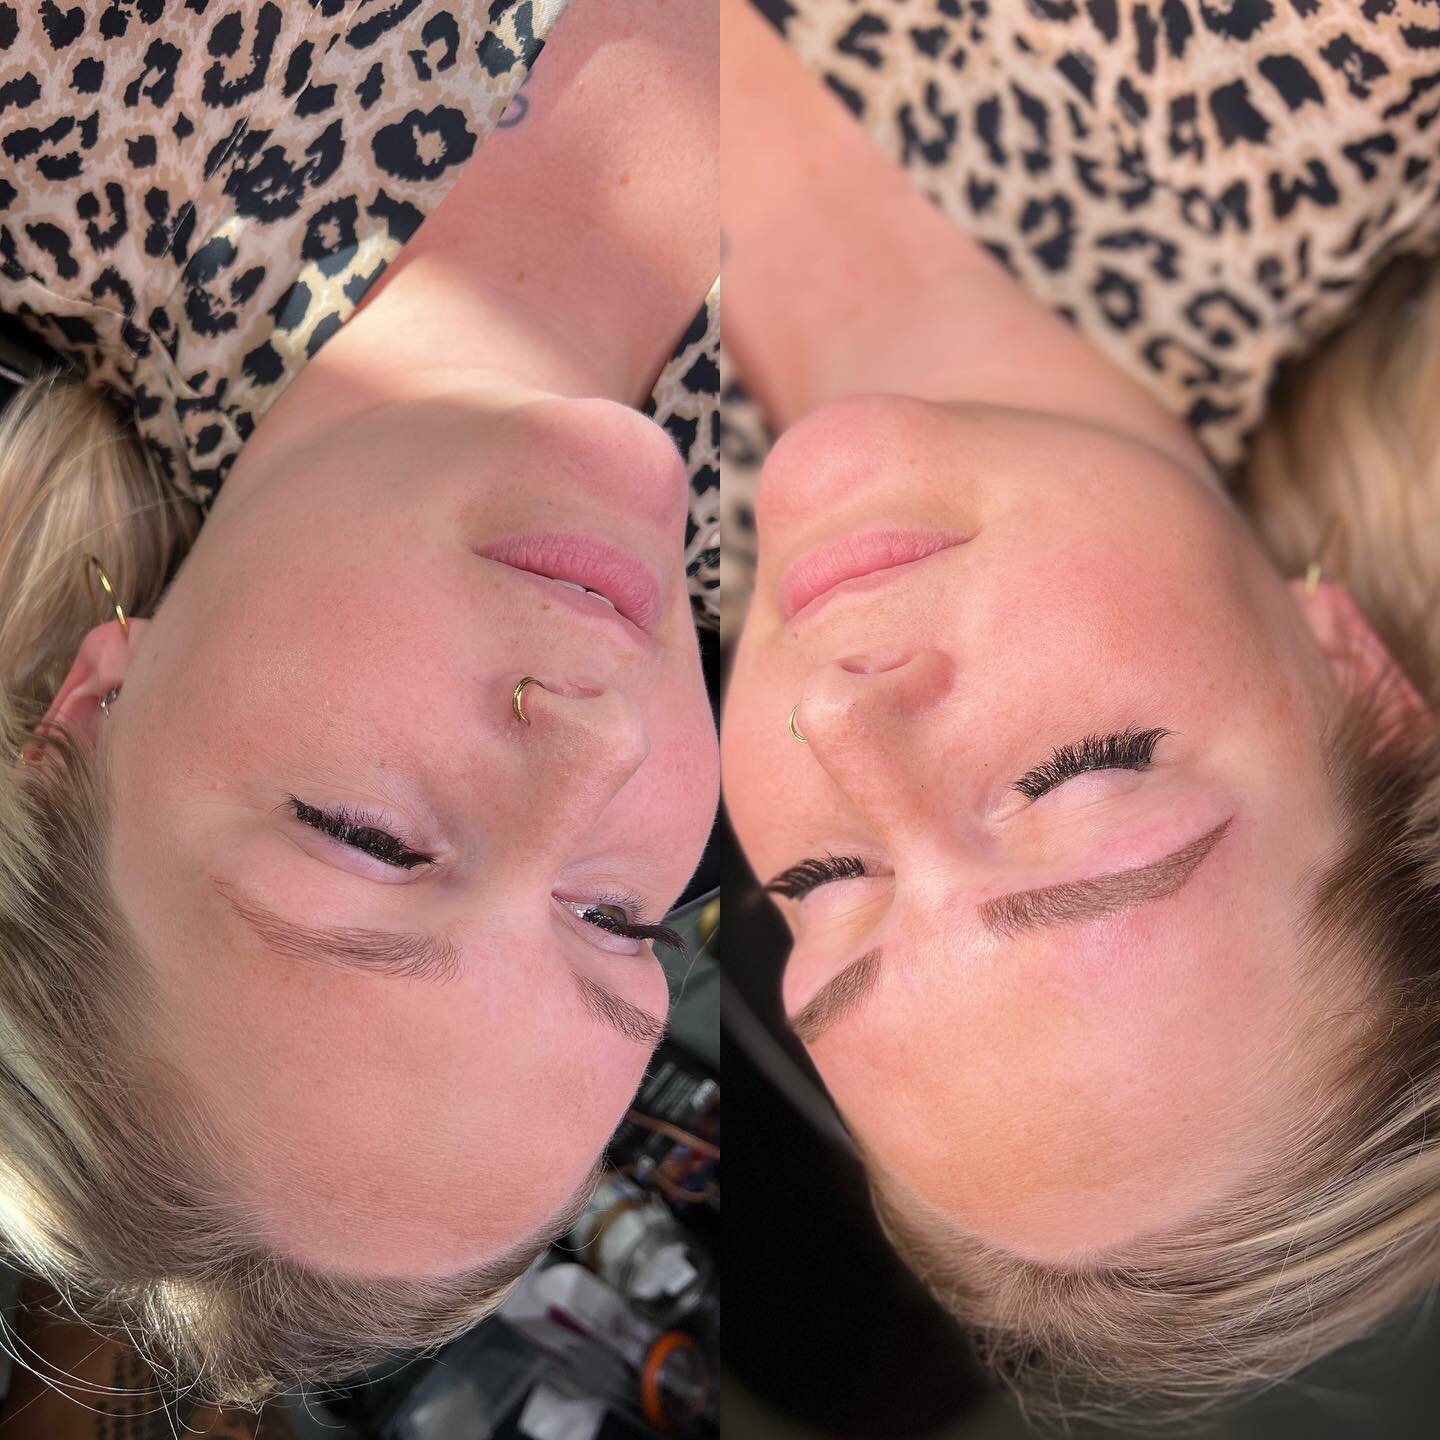 This Combo Brow Transformation! Literally waking up and running out the door with these brows 👏🏽
BOOK TODAY !

#brows #yxe #sk #saskbrows #saskbrowartist #combobrows #pmuartist yxebrows